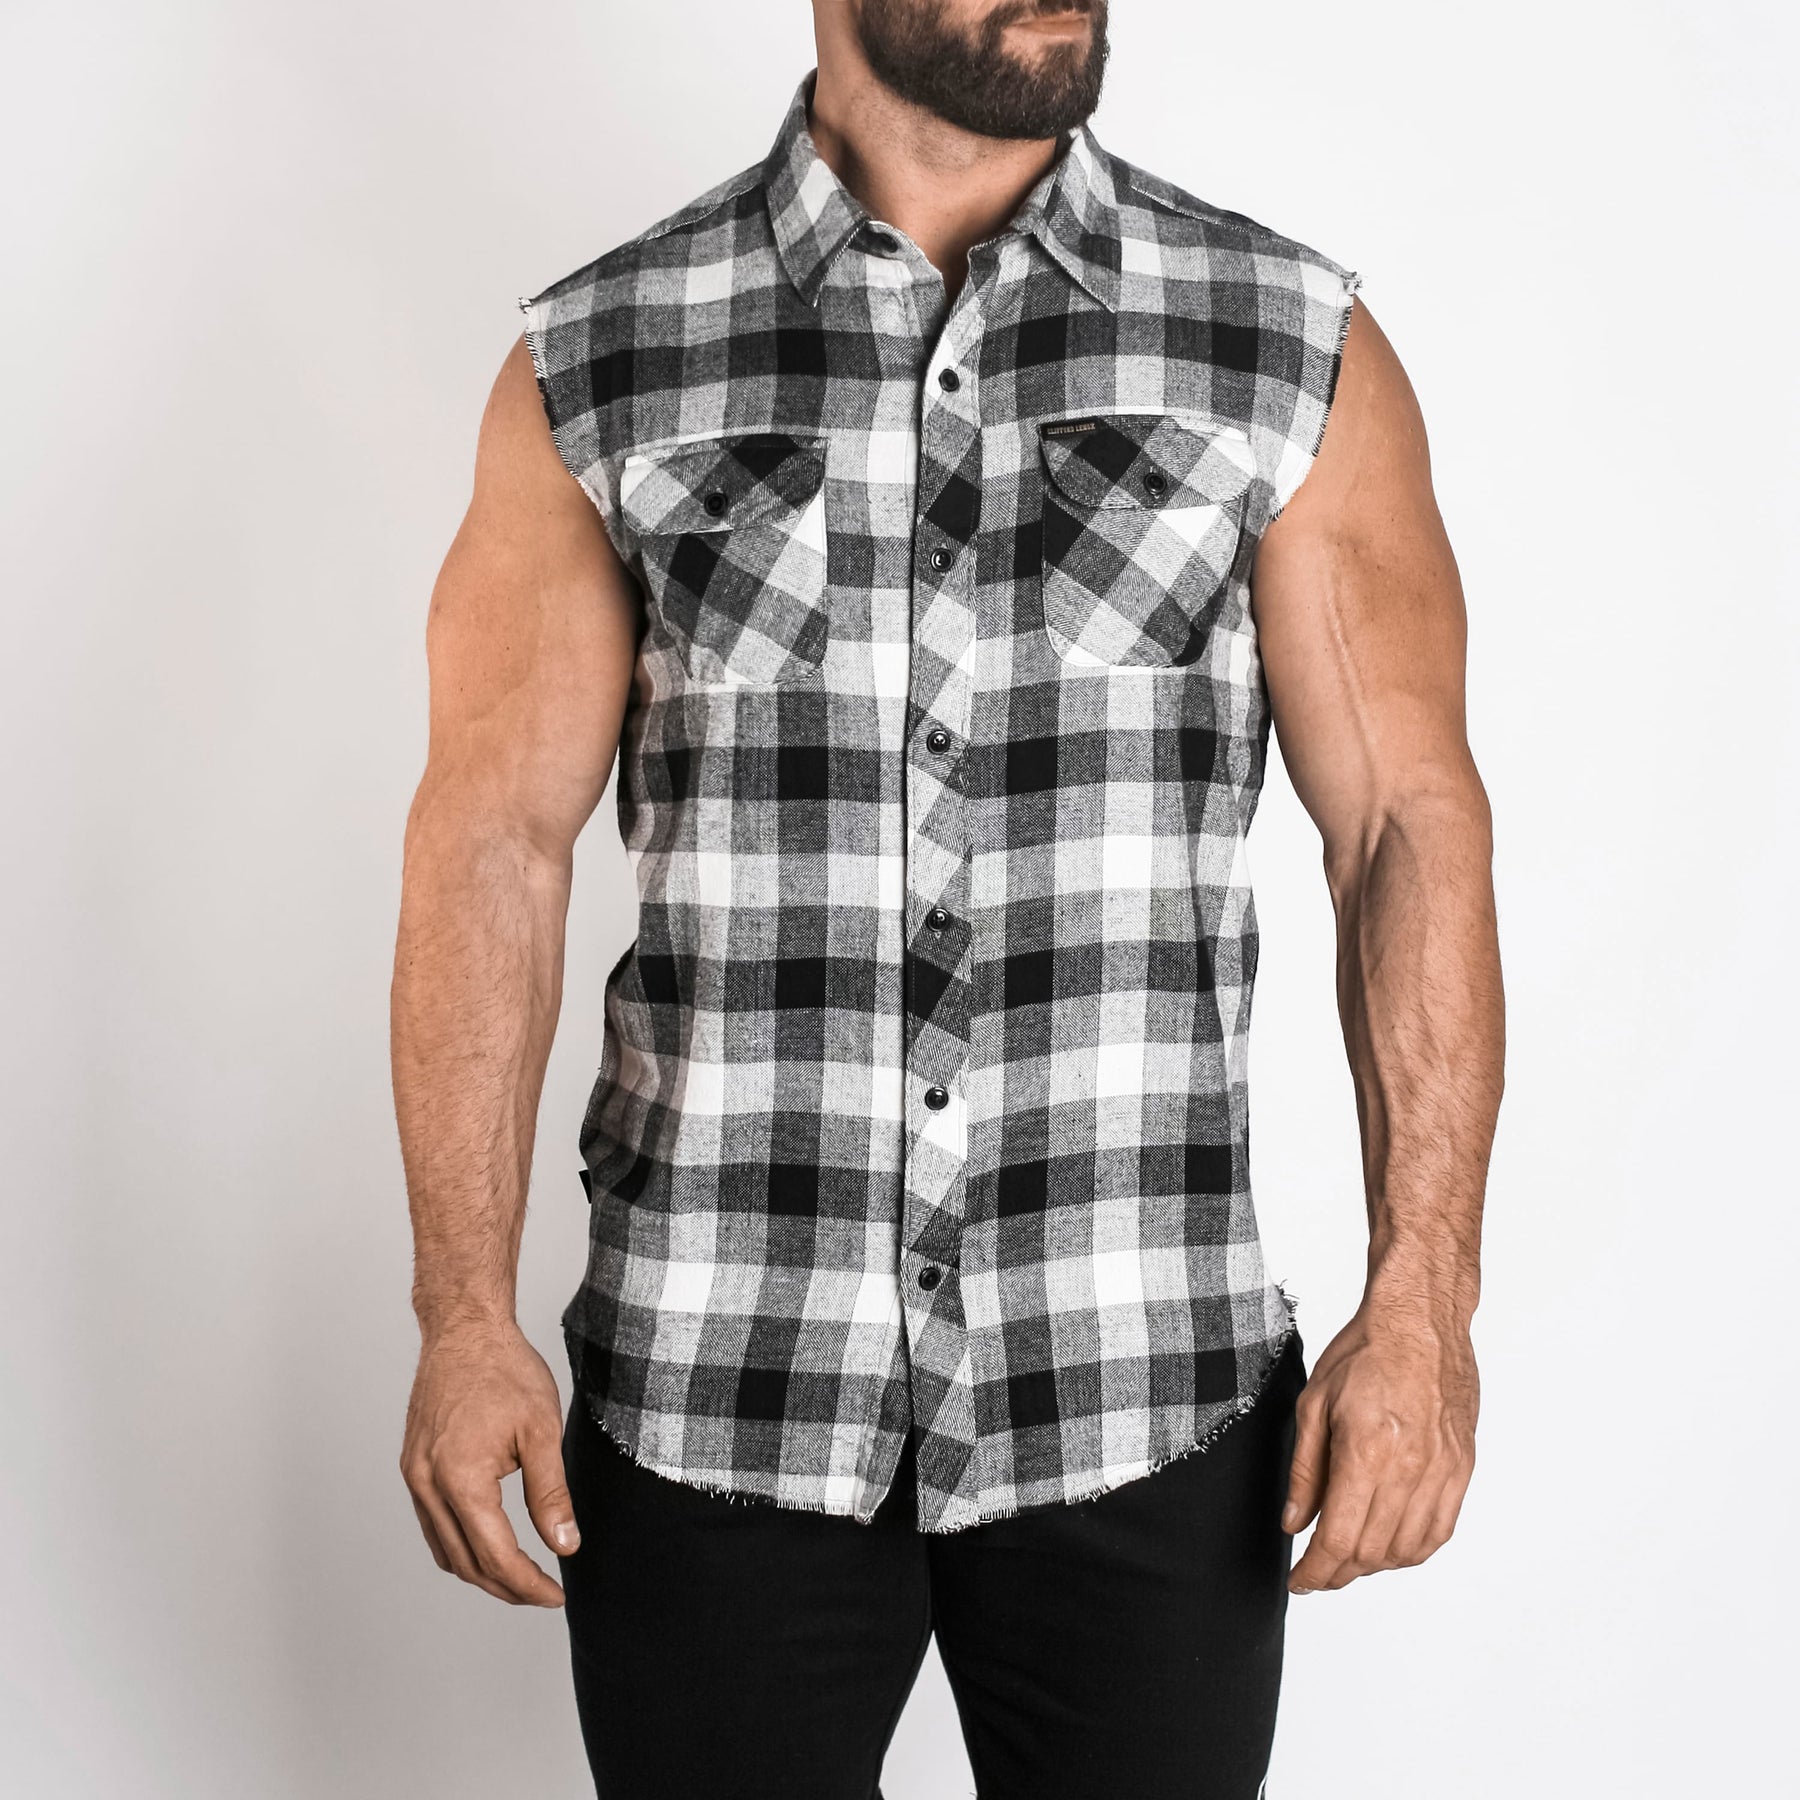 Buy Black and White Flannel - Classic Style for Every Wardrobe ...